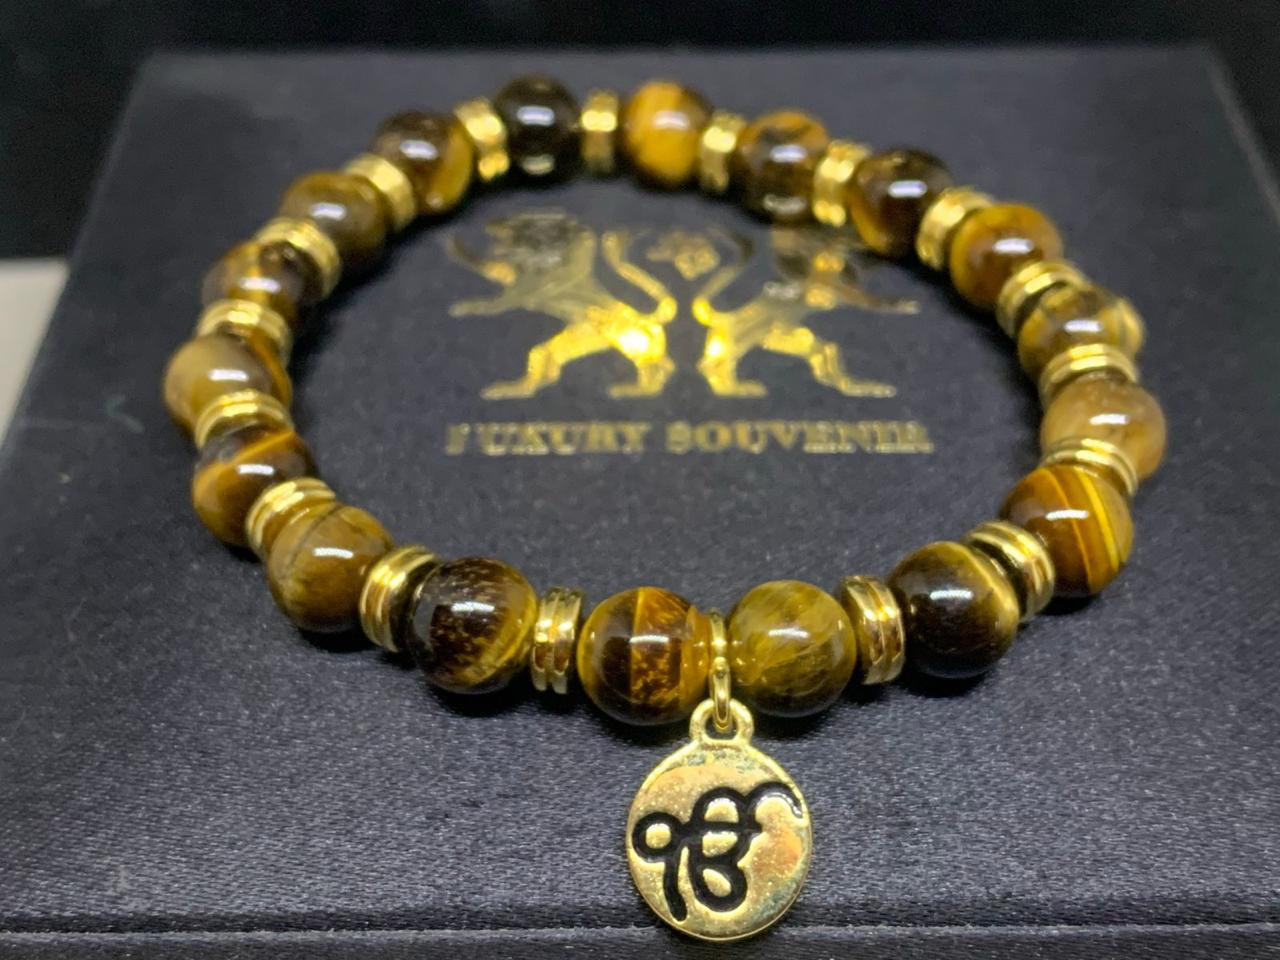 Ekonkar Tag Bracelet in Exotic Tiger Stone Beads 24Kt Gold Plated 925 Silver